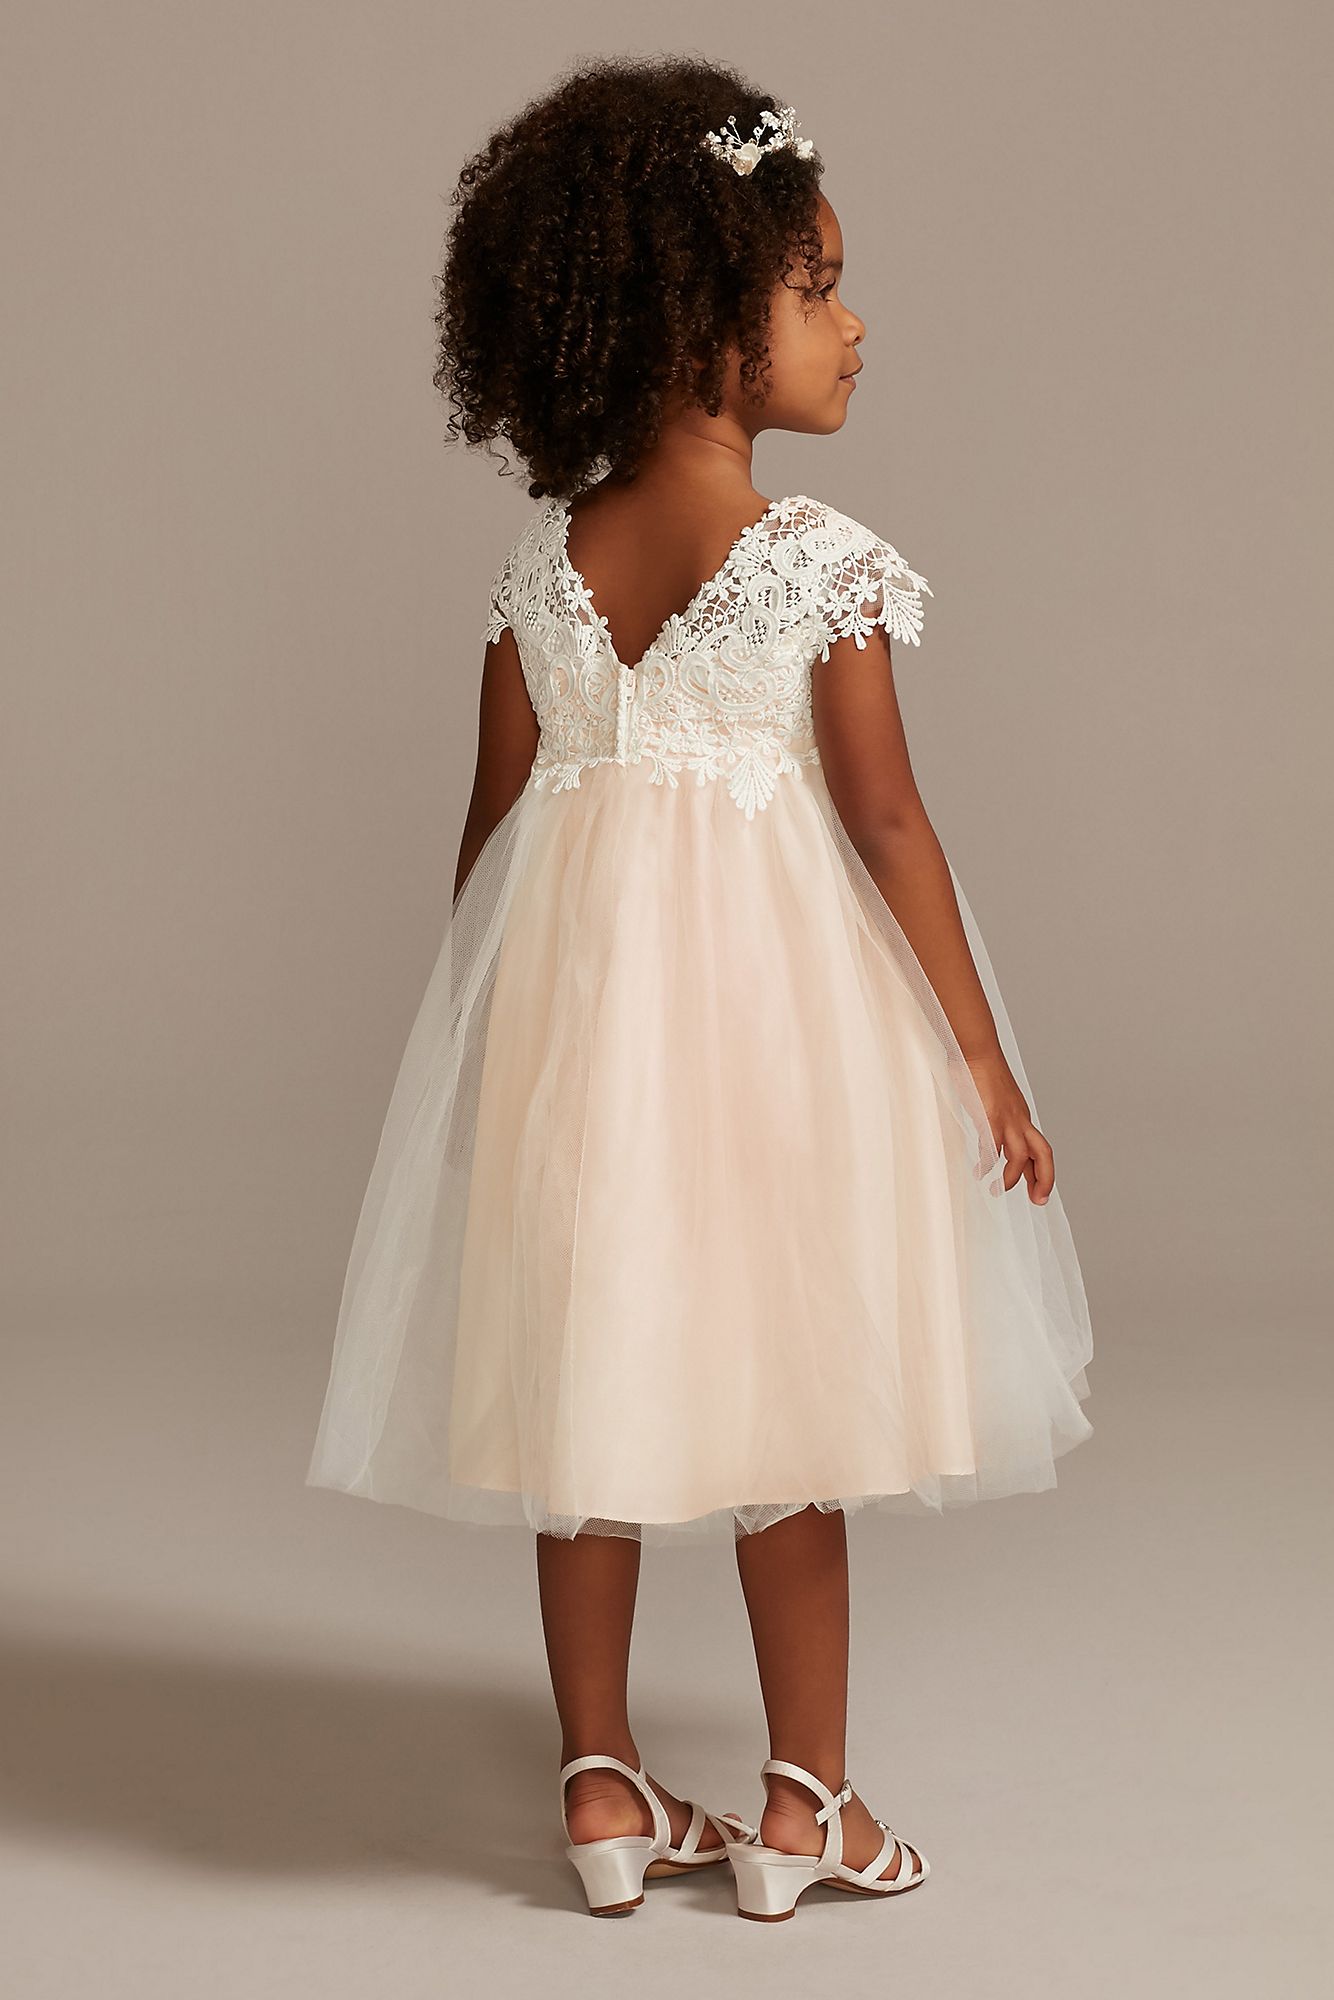 Cap Sleeve Venise Lace and Tulle OP269 Flower Girl Dress